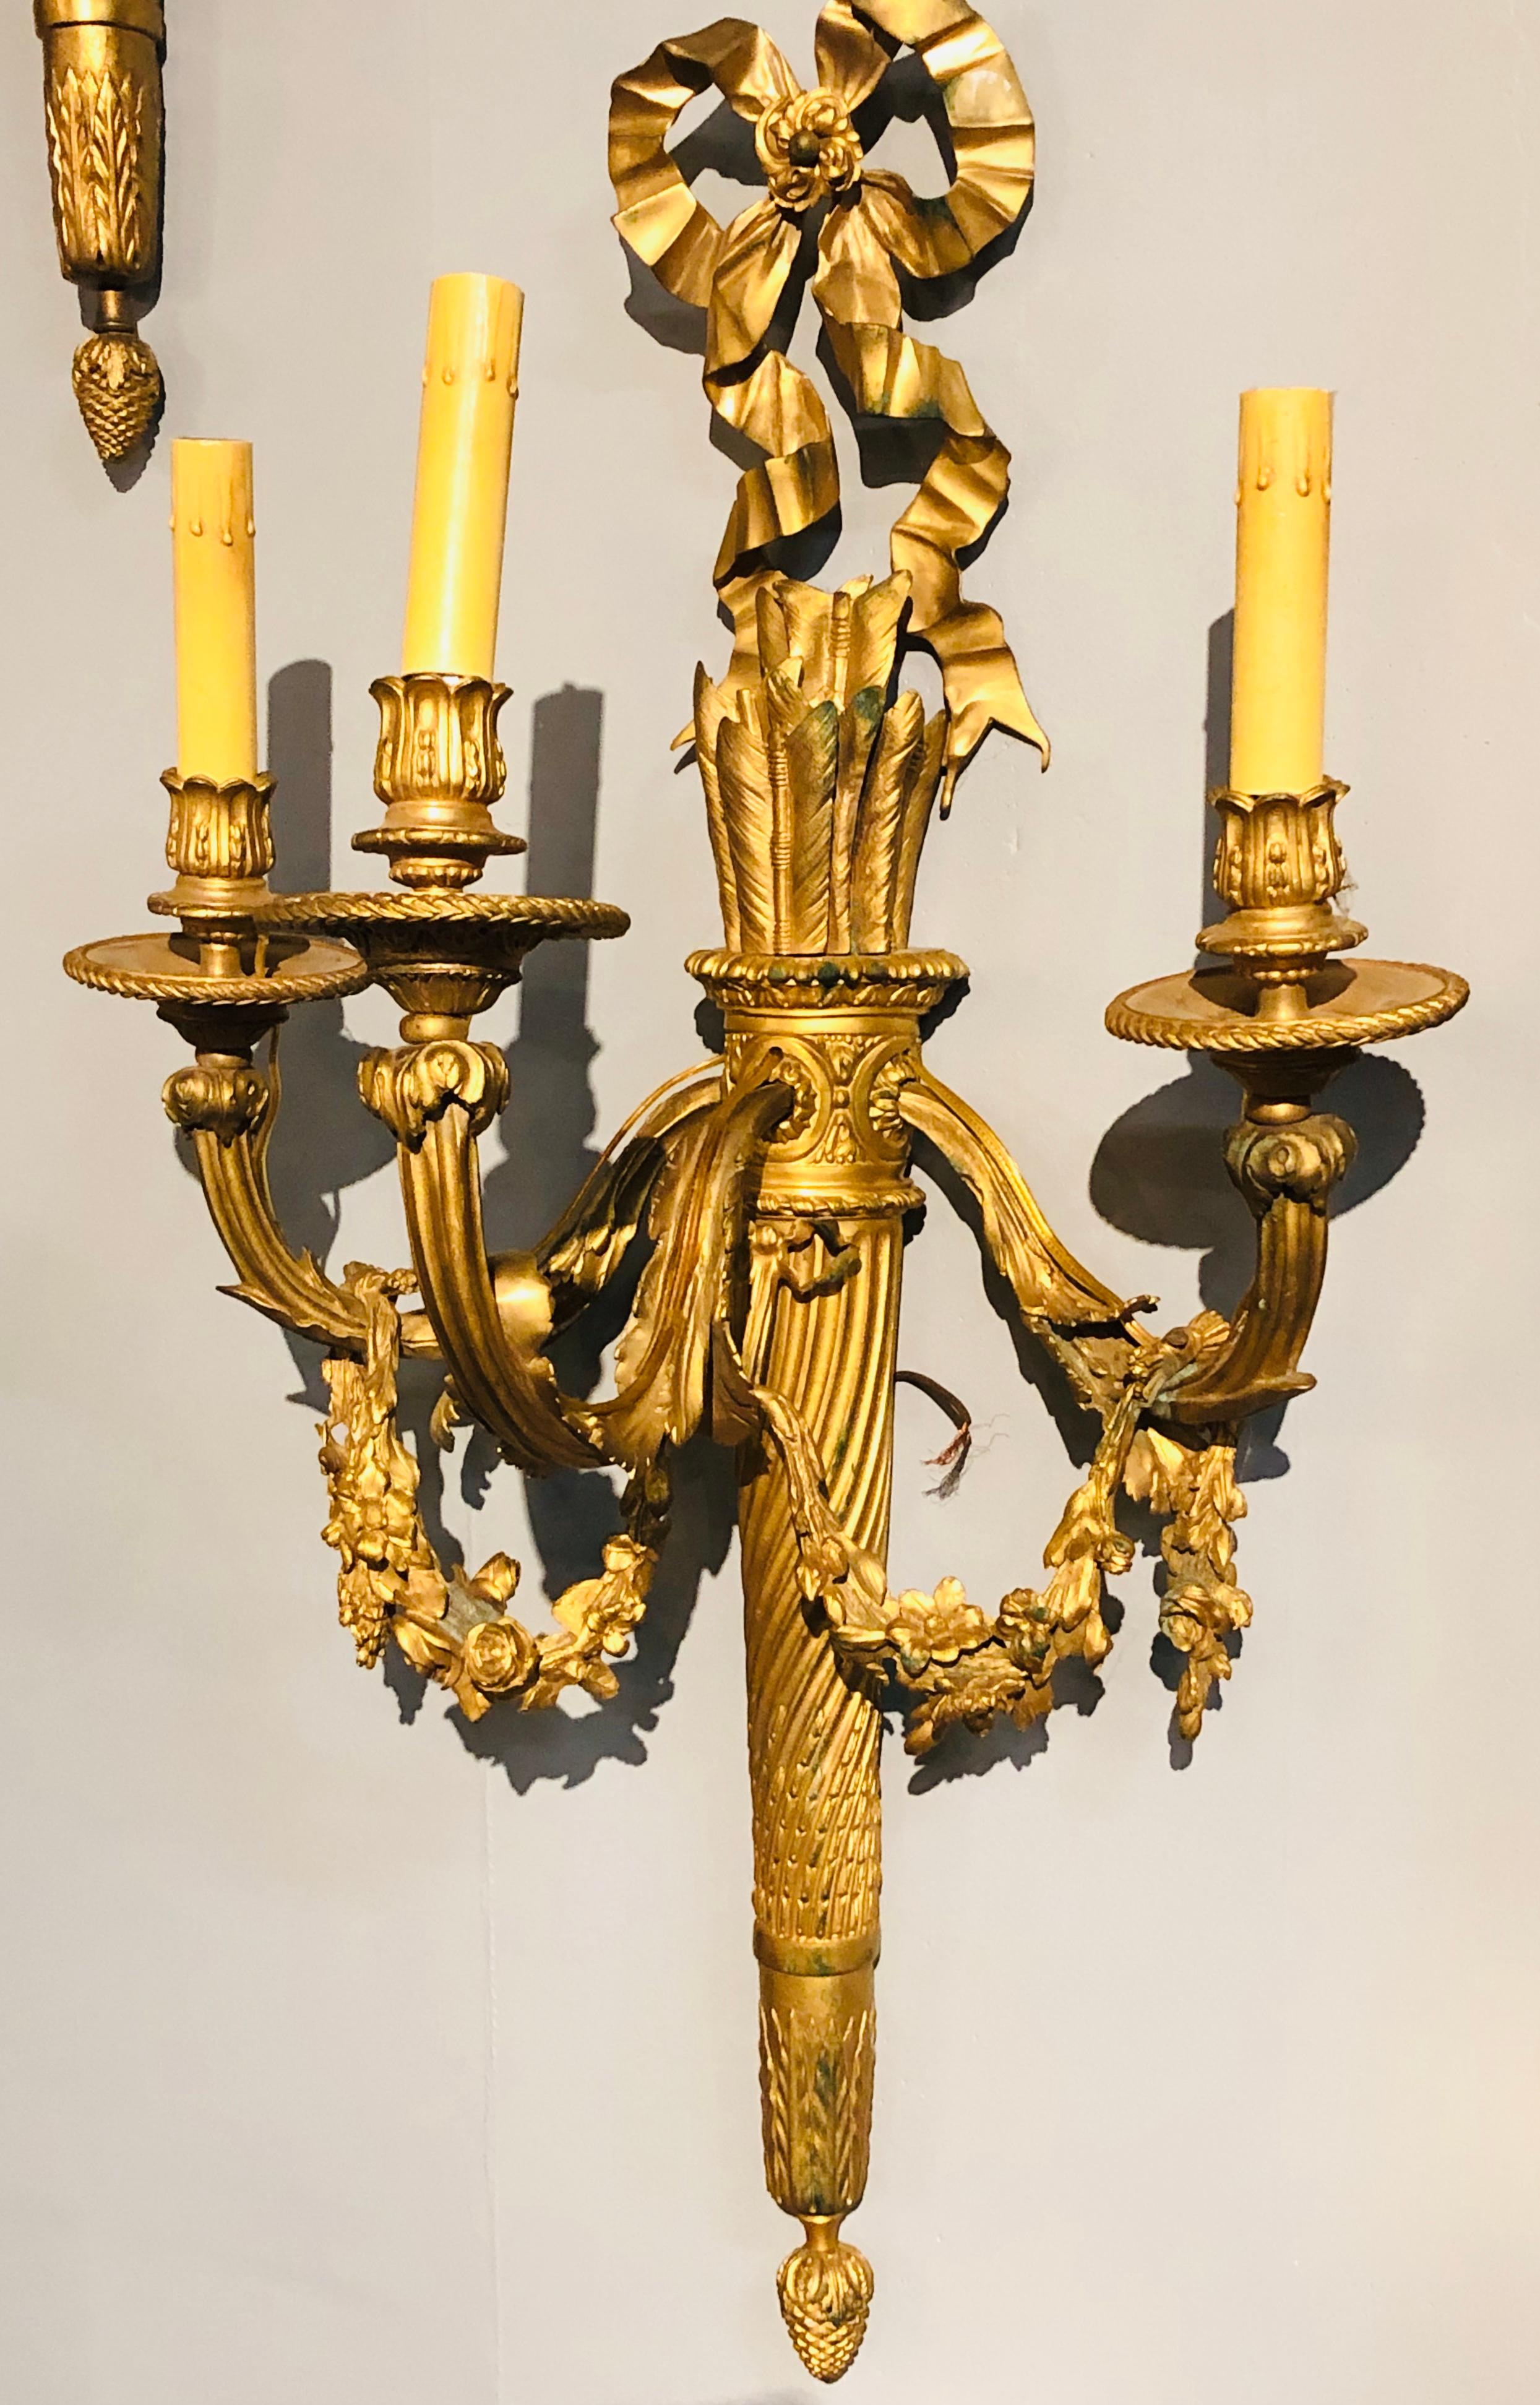 20th Century Set of Four Large Ornate Three-Light Torch and Ribbon Form Wall Sconces